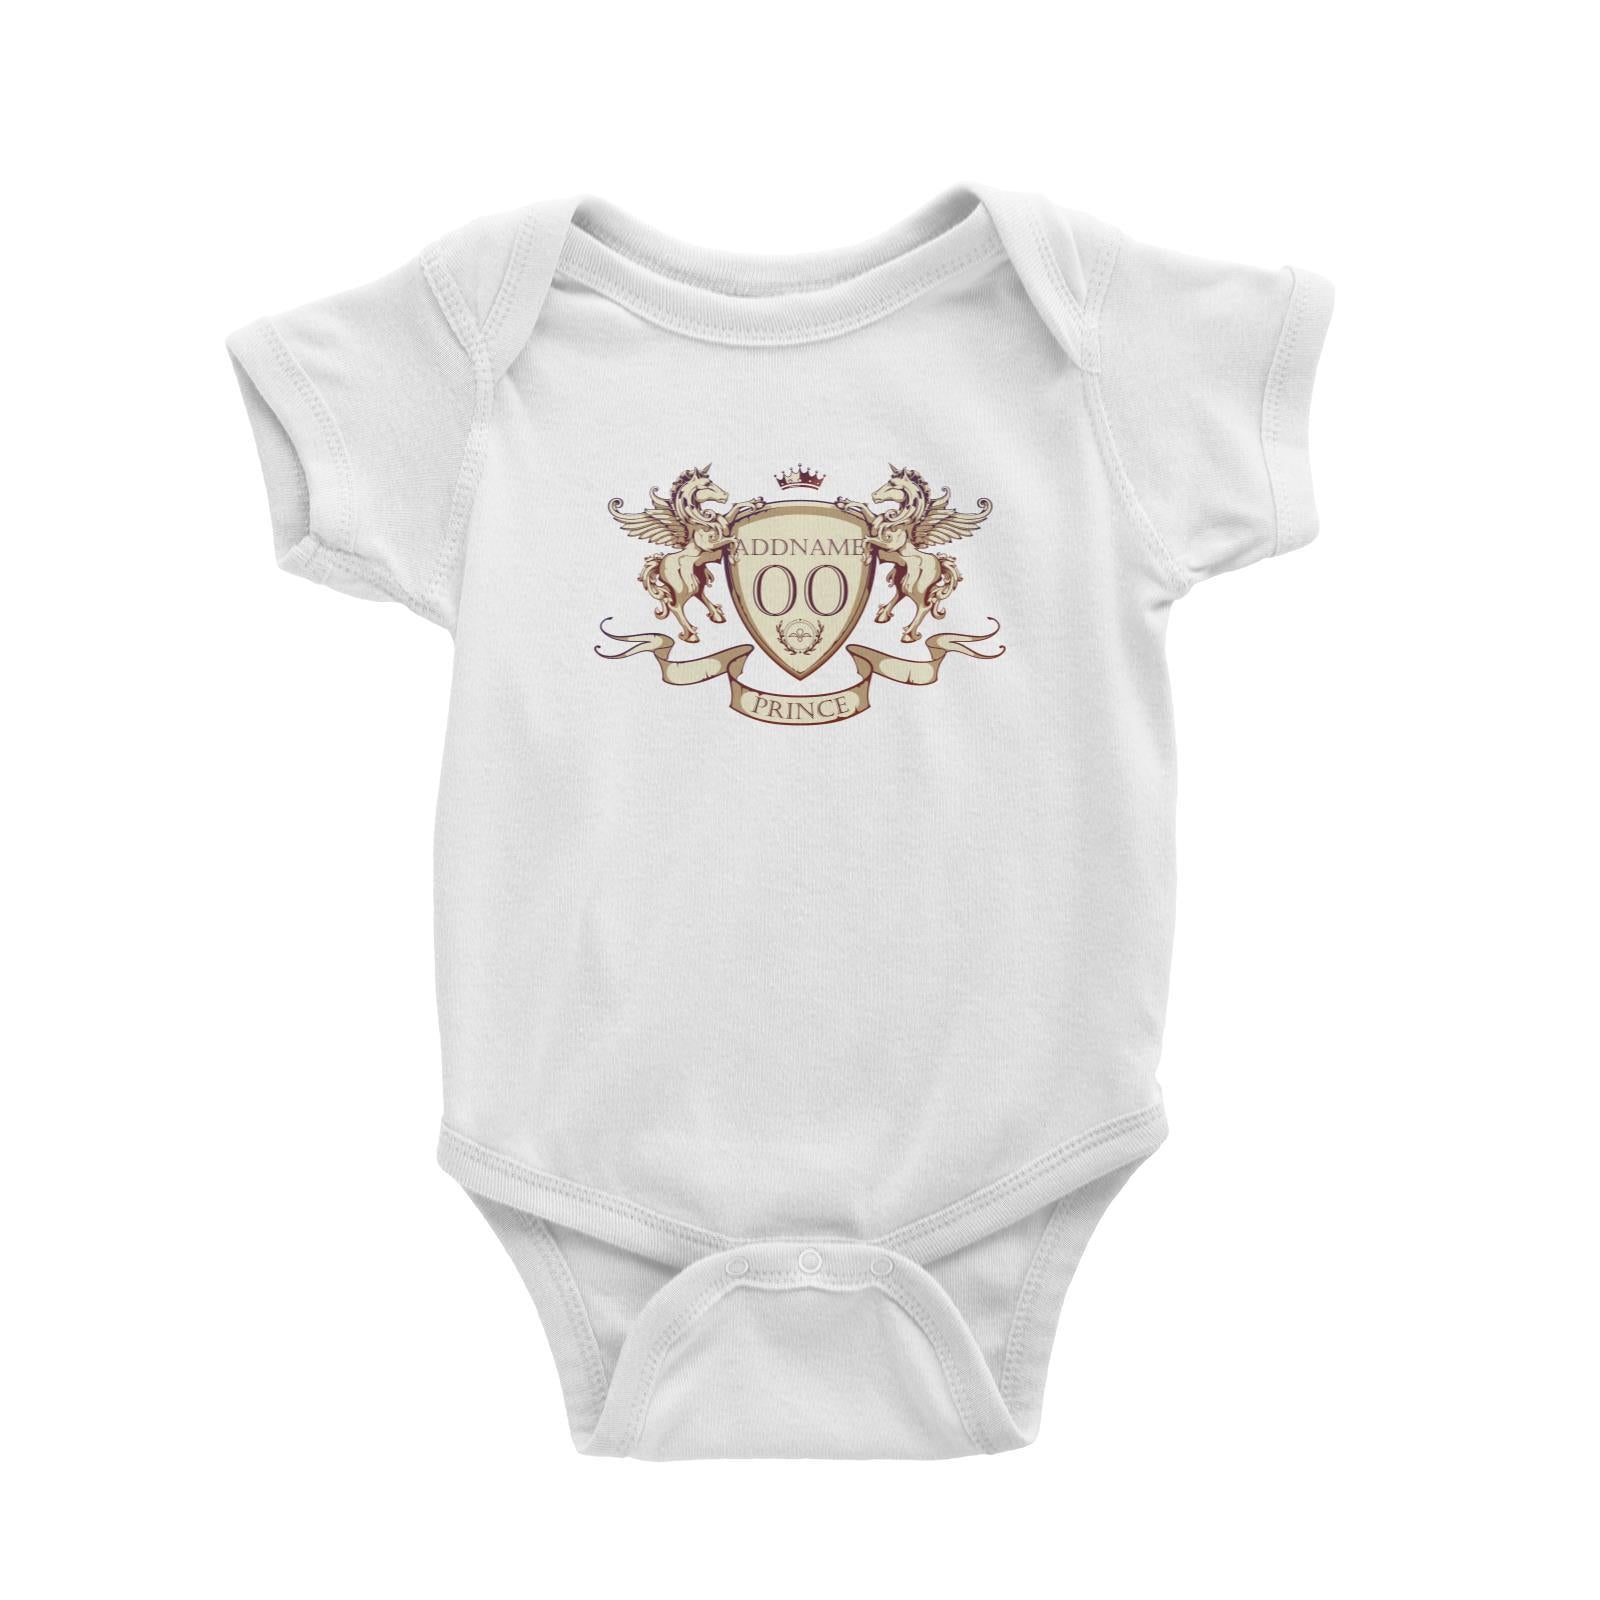 Horse Royal Emblem Prince Personalizable with Name and Number Baby Romper